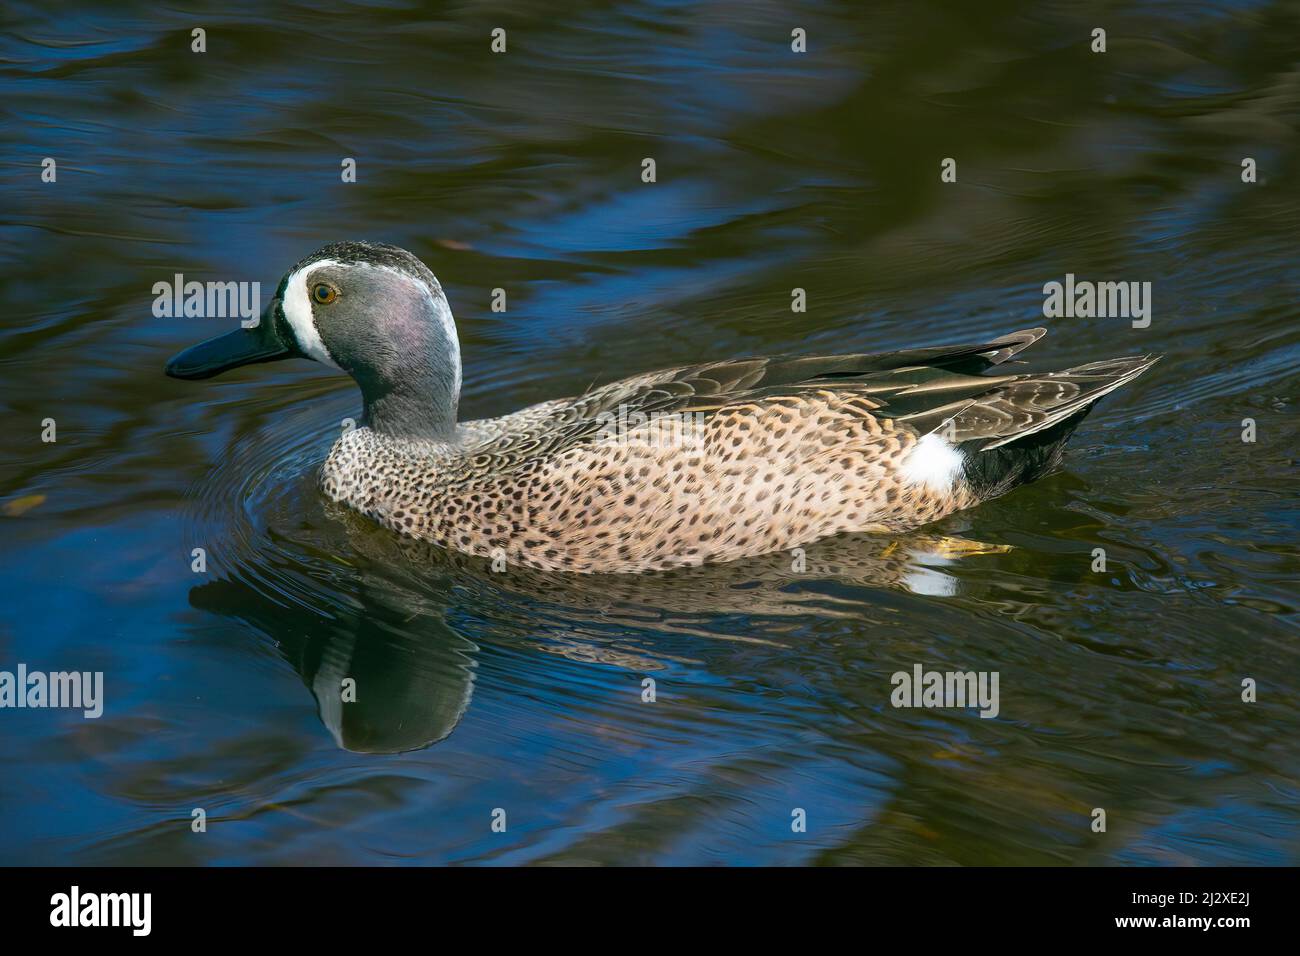 A male blue-winged teal duck swims across a pond in the Florida Everglades. Stock Photo